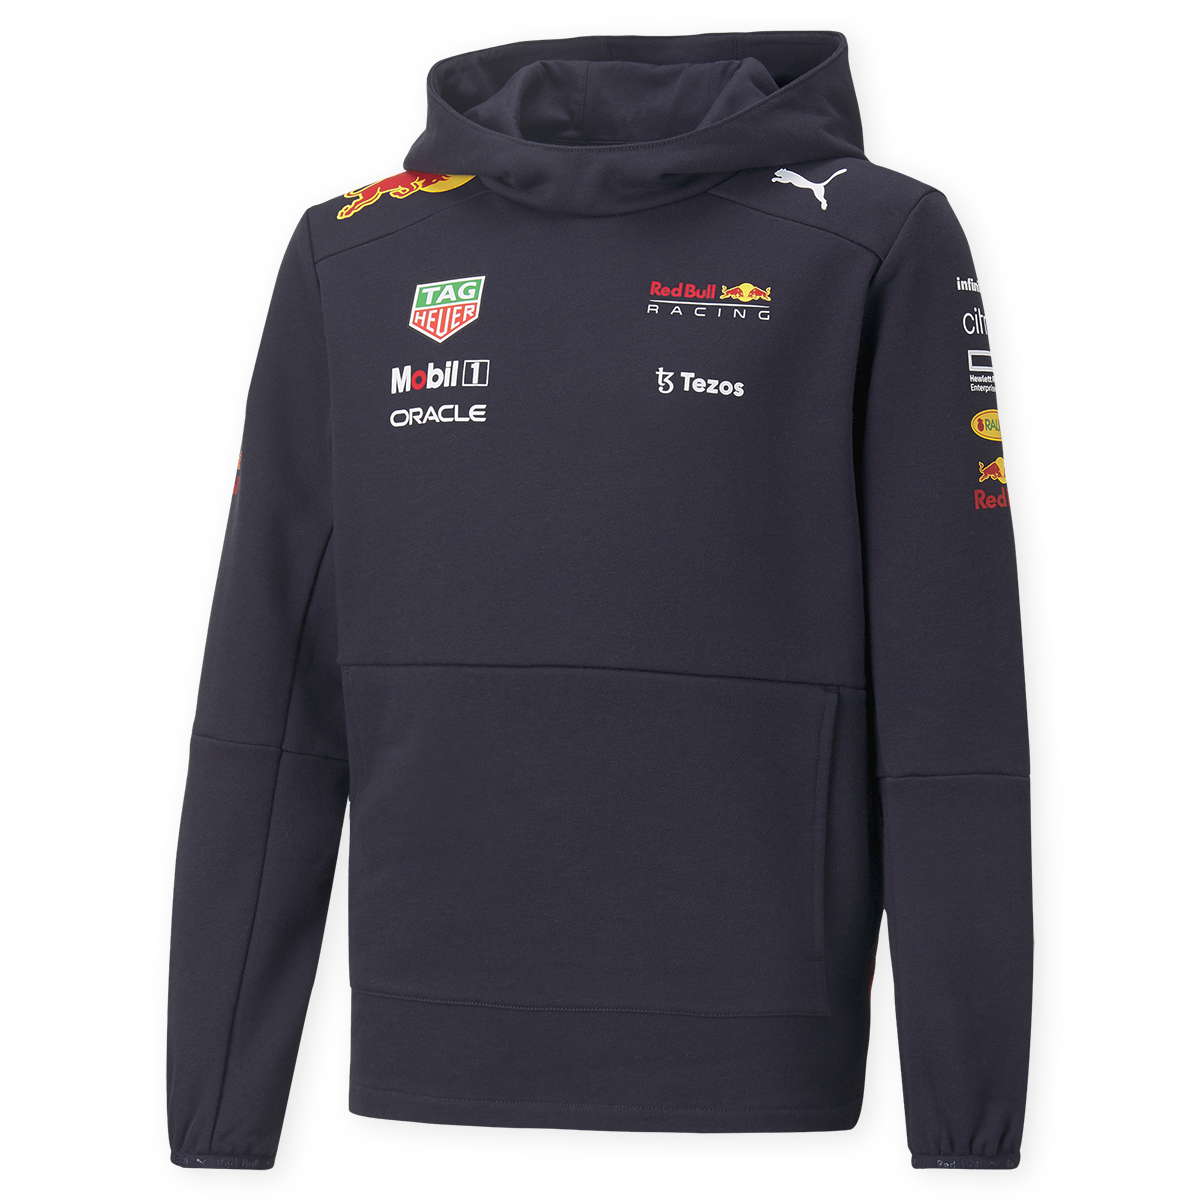 Red Bull Kleding Sweater Hoodie Heren Max Verstappen Hoodie Officiële Formule Merchandise M Red Bull Racing here to give you what you Best Prices Everyday low prices